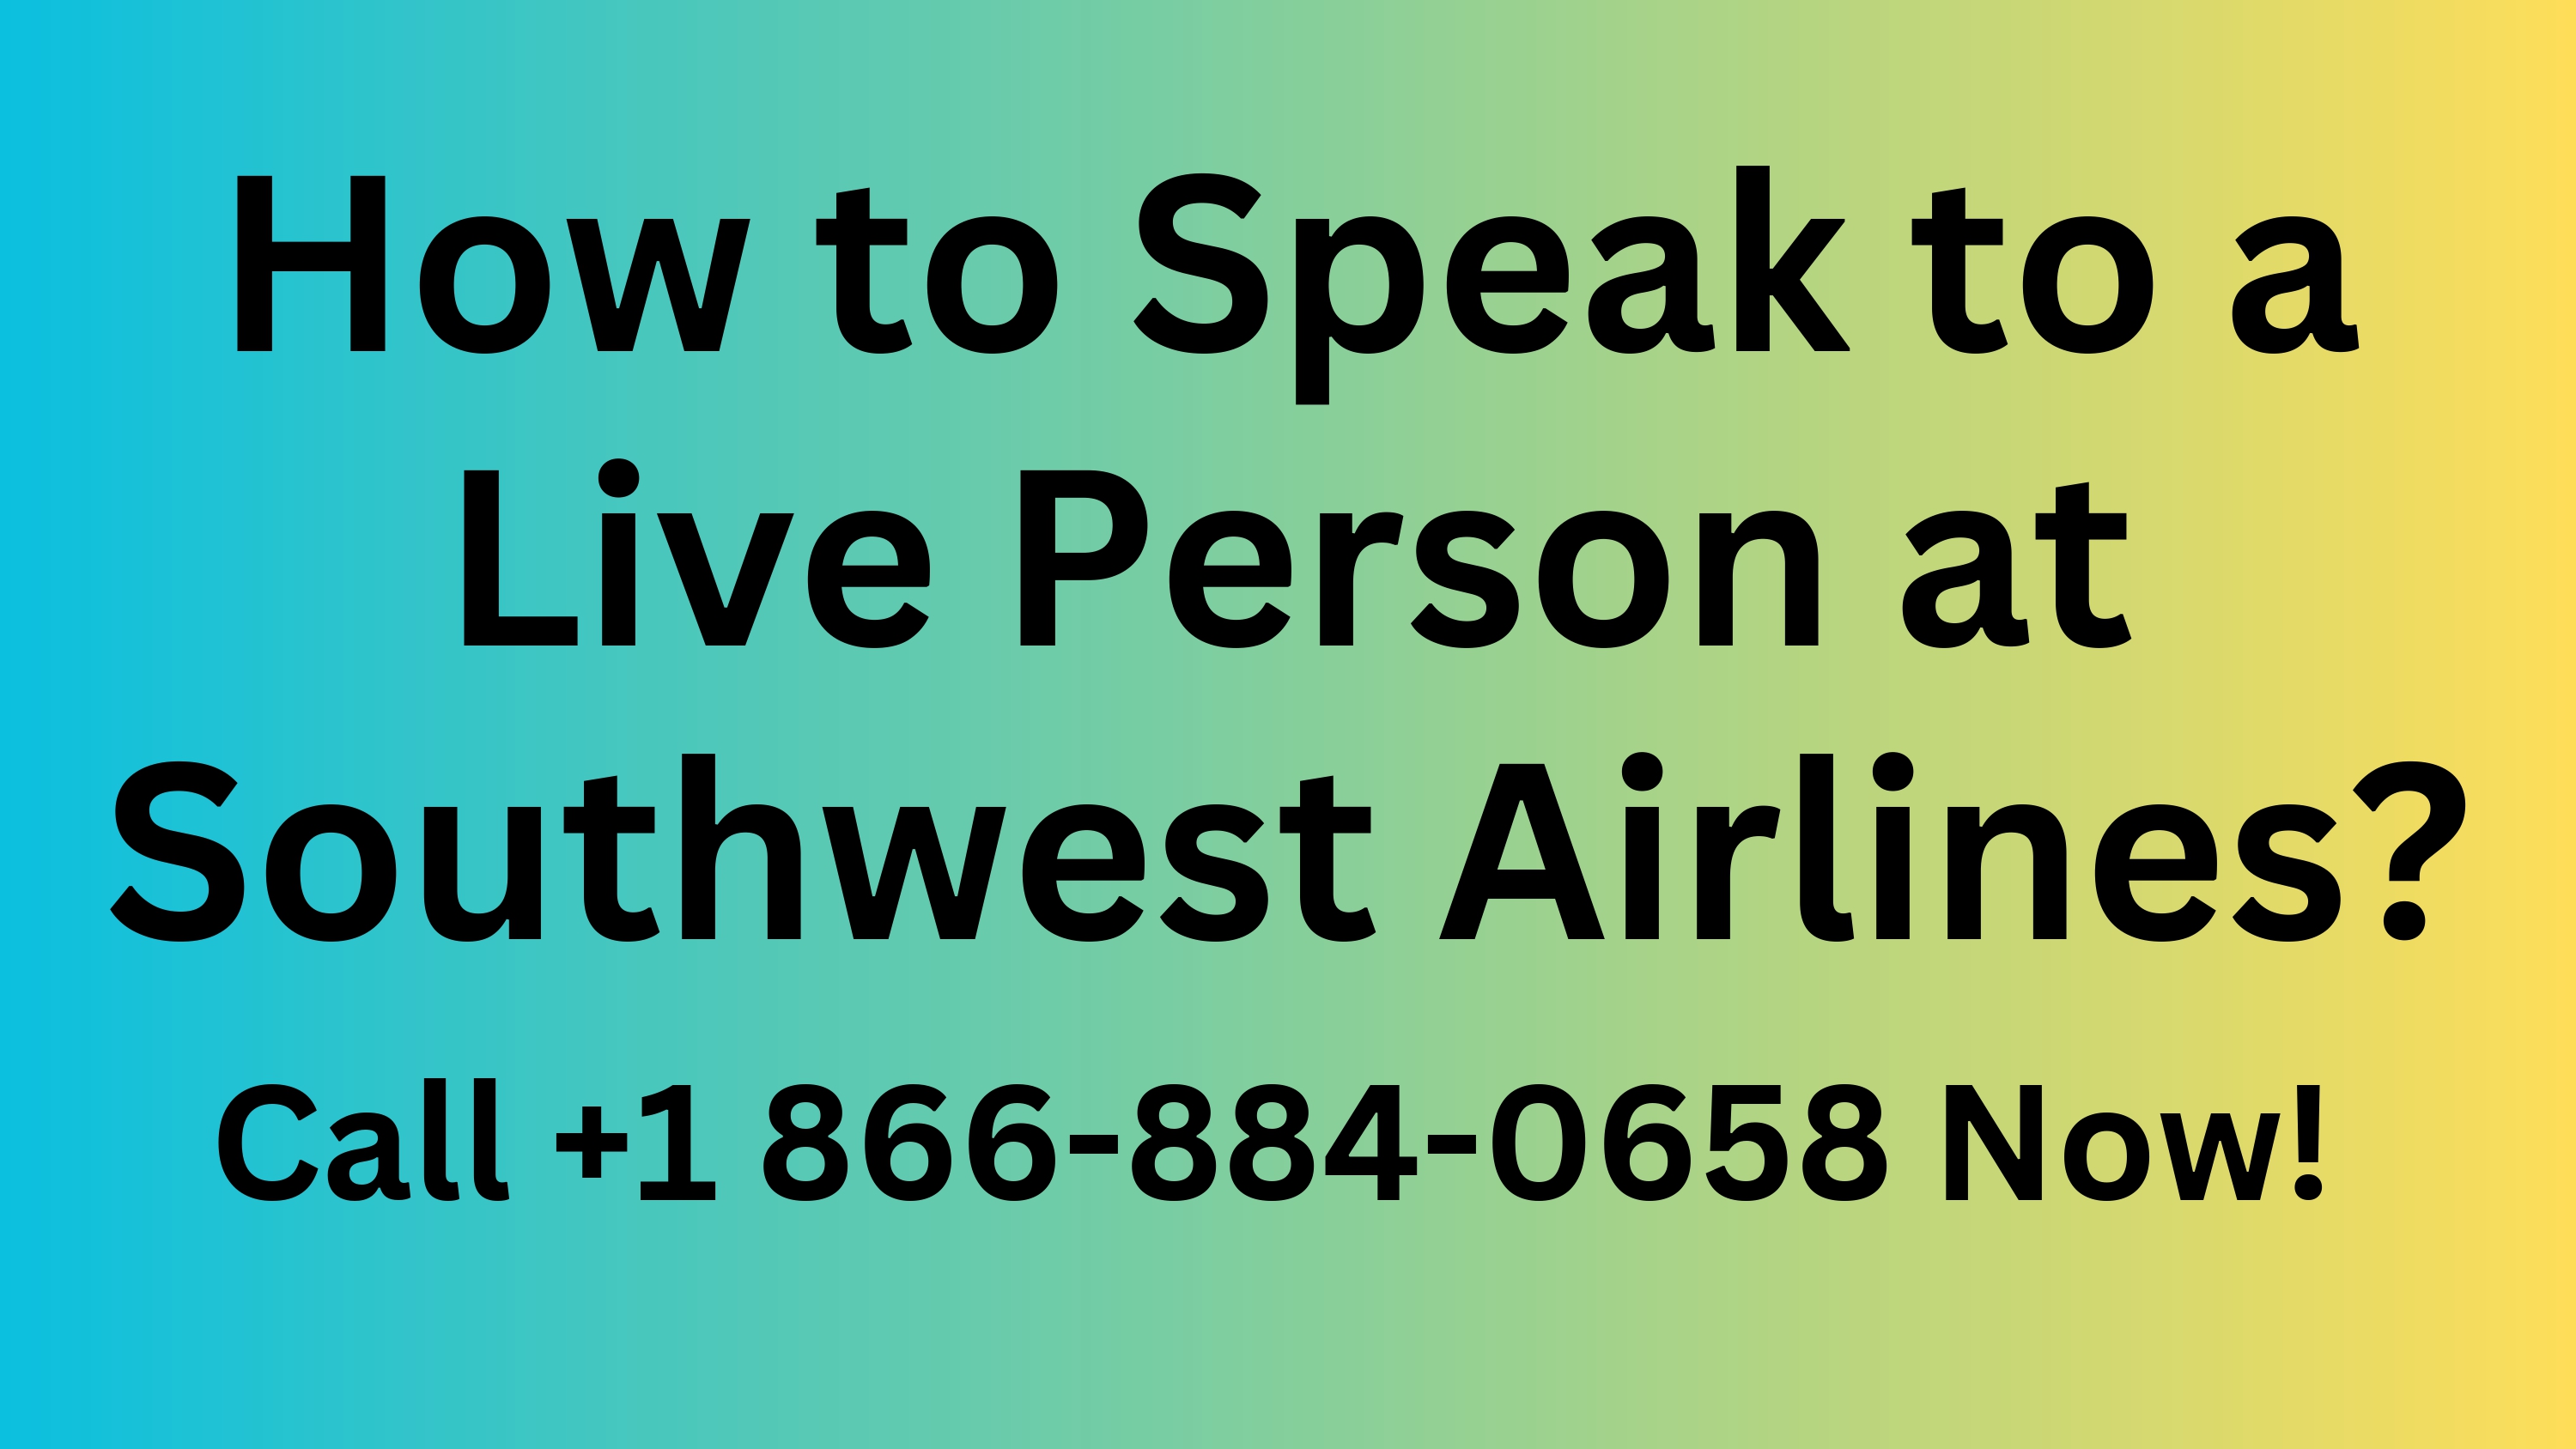 How Do I Talk to Someone on Southwest Airlines: Call +1 866-884-0658 For [24x7 Support]